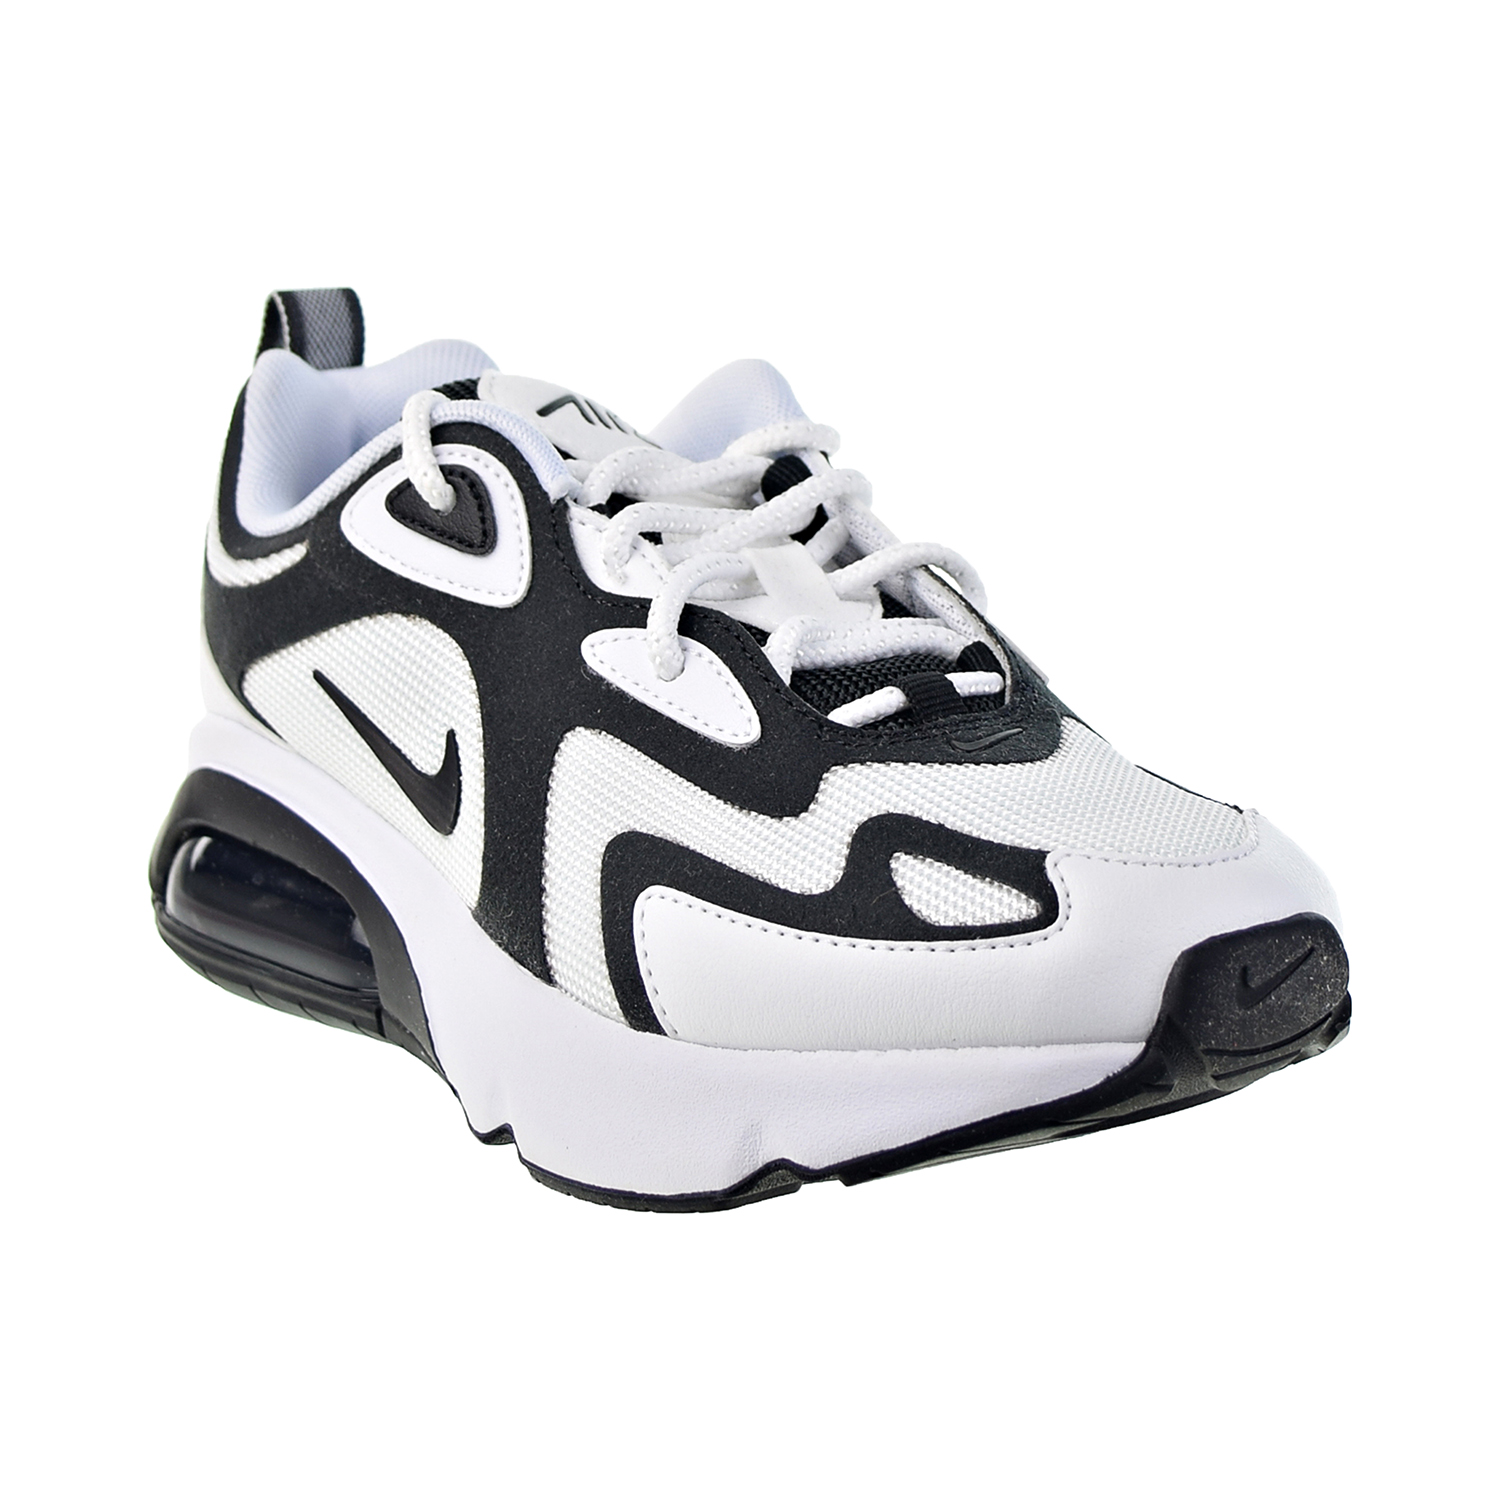 Nike Air Max 200 Womens Shoes Size 6, Color: White/Black/Anthracite - image 2 of 6